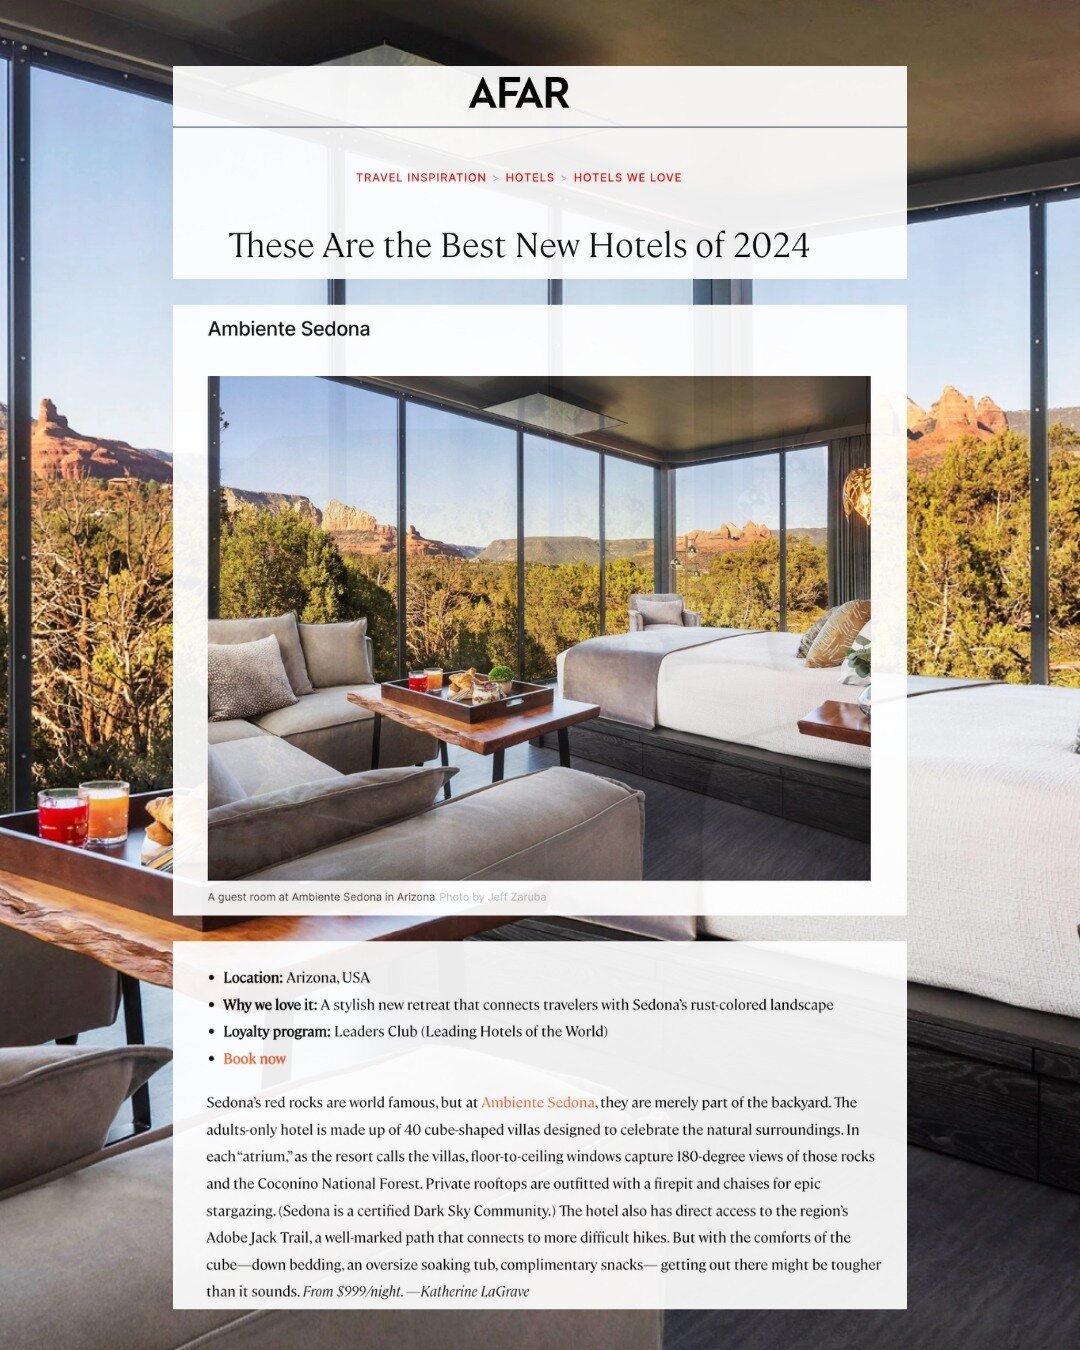 Hot off the press! 🗞️ @AFARmedia just named @AmbienteSedona among the Best New Hotels in the World for 2024. Out of 31 hotels - only 5 U.S. hotels made the cut. Offering unparalleled views of the world-famous #Sedona red rocks from their luxurious g